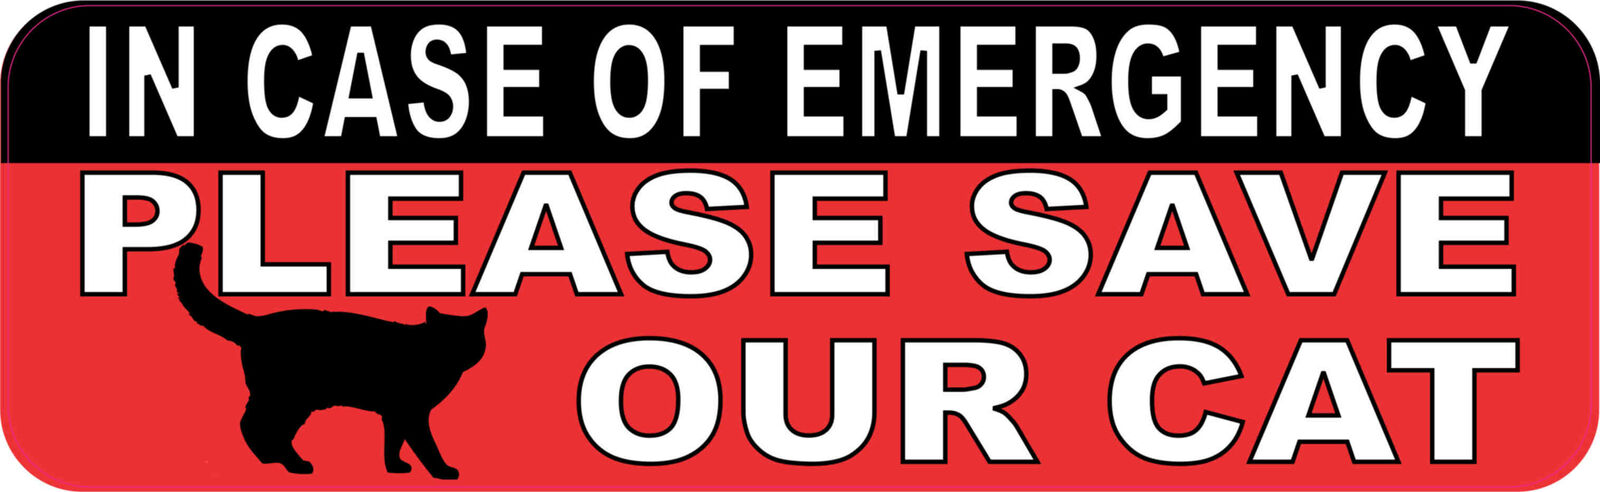 10x3 In Case of Emergency Please Save Our Cat Vinyl Sticker House Door Stickers